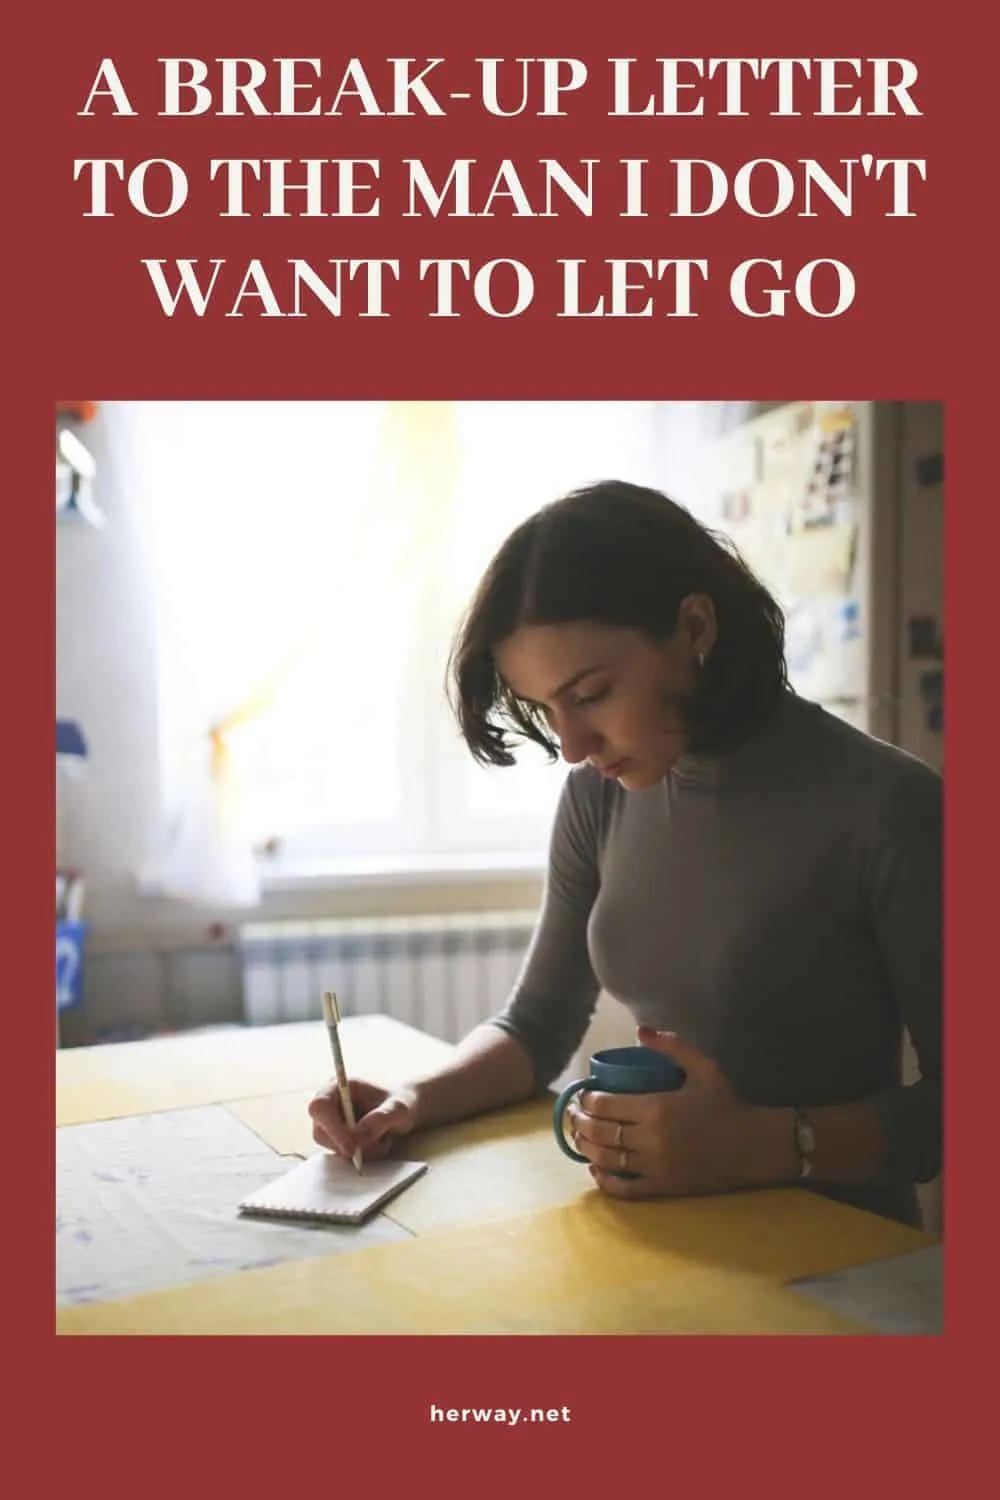 A Break-Up Letter To The Man I Don't Want To Let Go